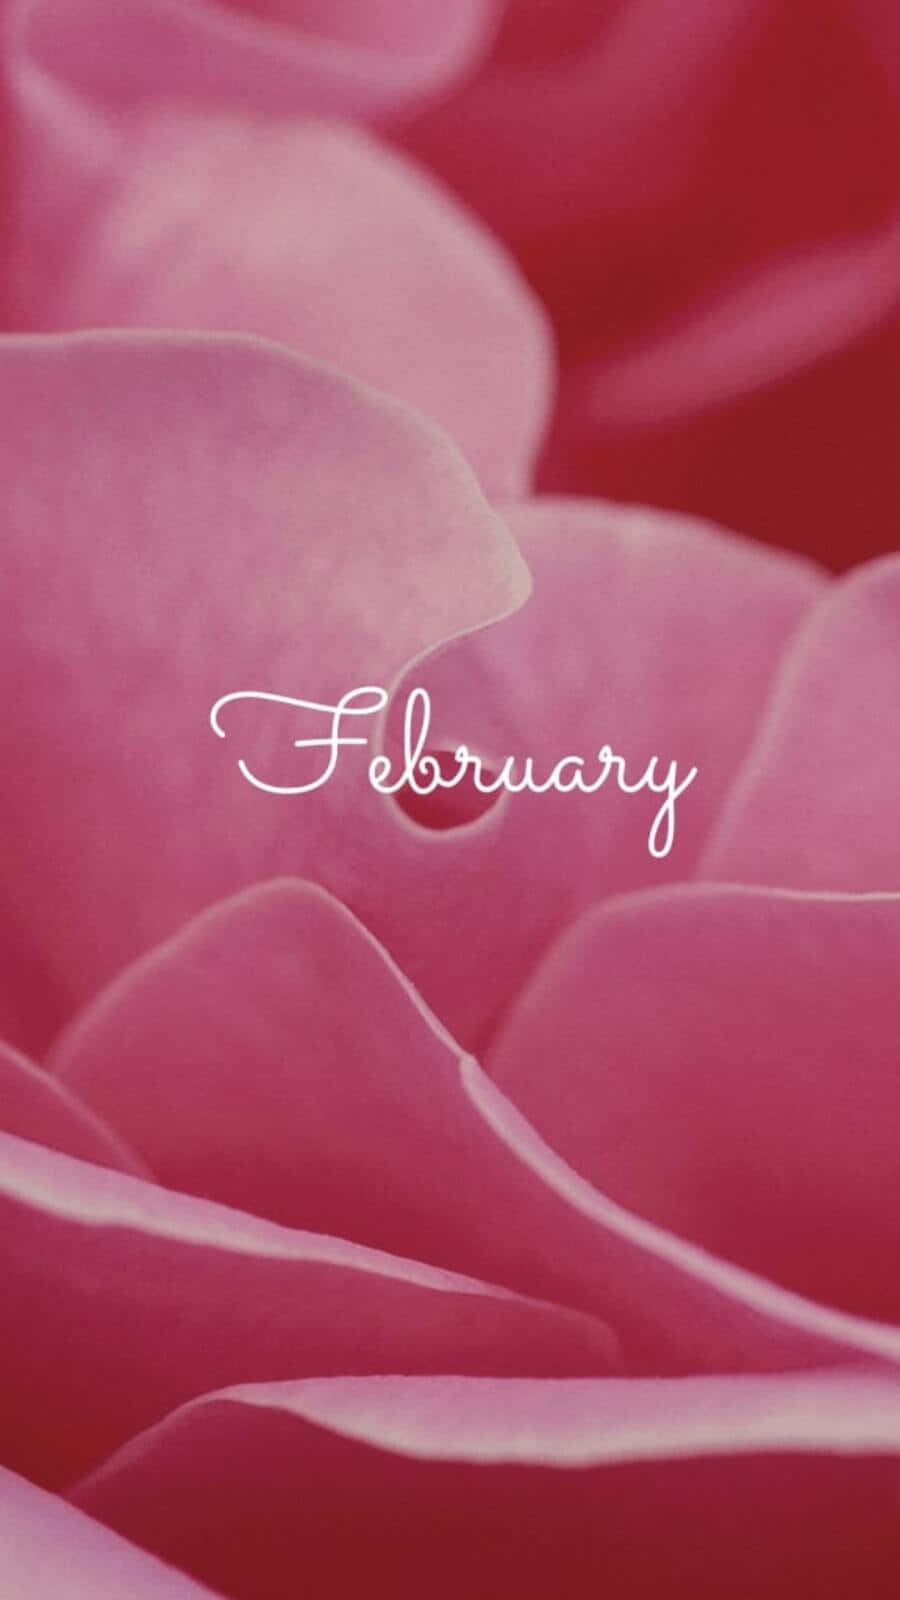 Cozy February iPhone Wallpaper with Seasonal Elements in a Whimsical Design Wallpaper